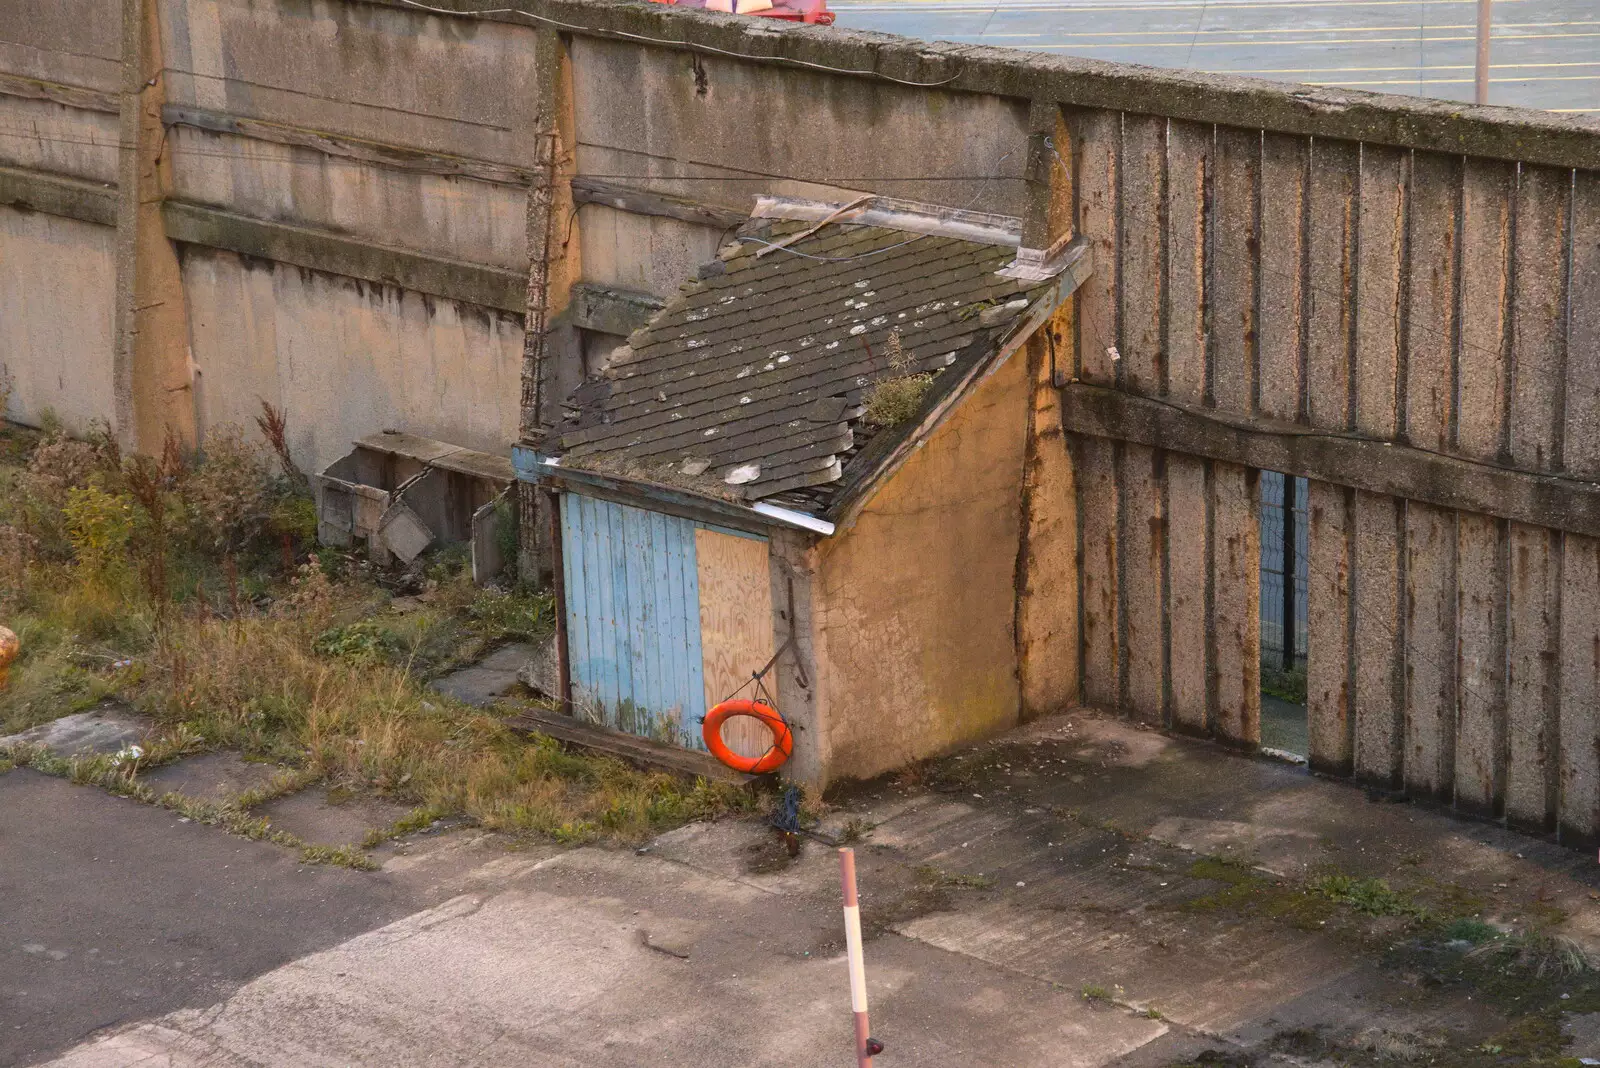 A curious hut on the dock, from Pork Pies and Dockside Dereliction, Melton Mowbray and Liverpool - 7th August 2021